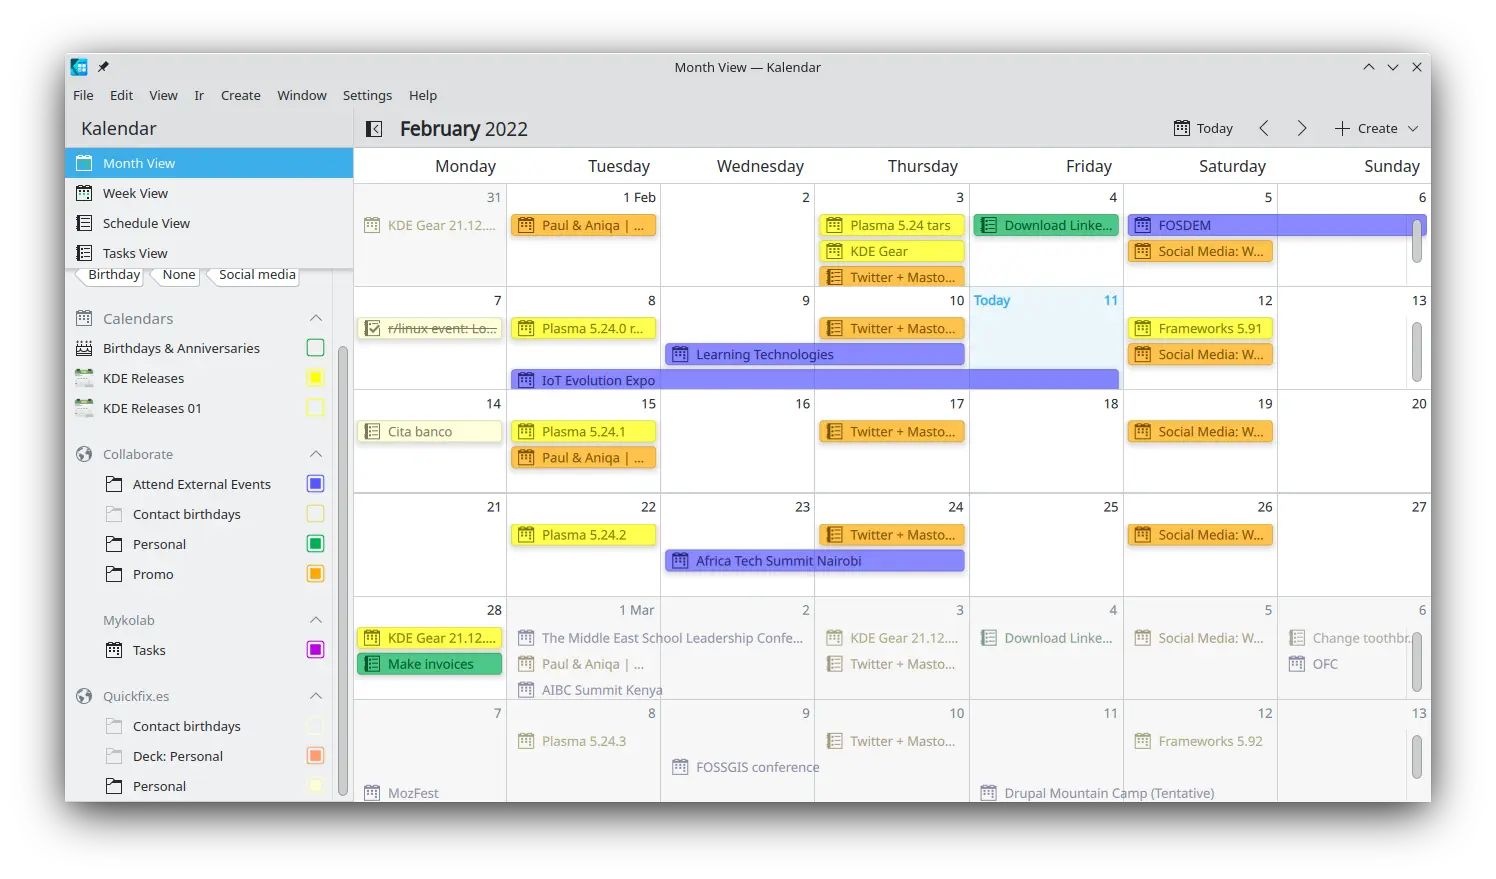 Kalendar helps you keep track of your appointments and tasks.